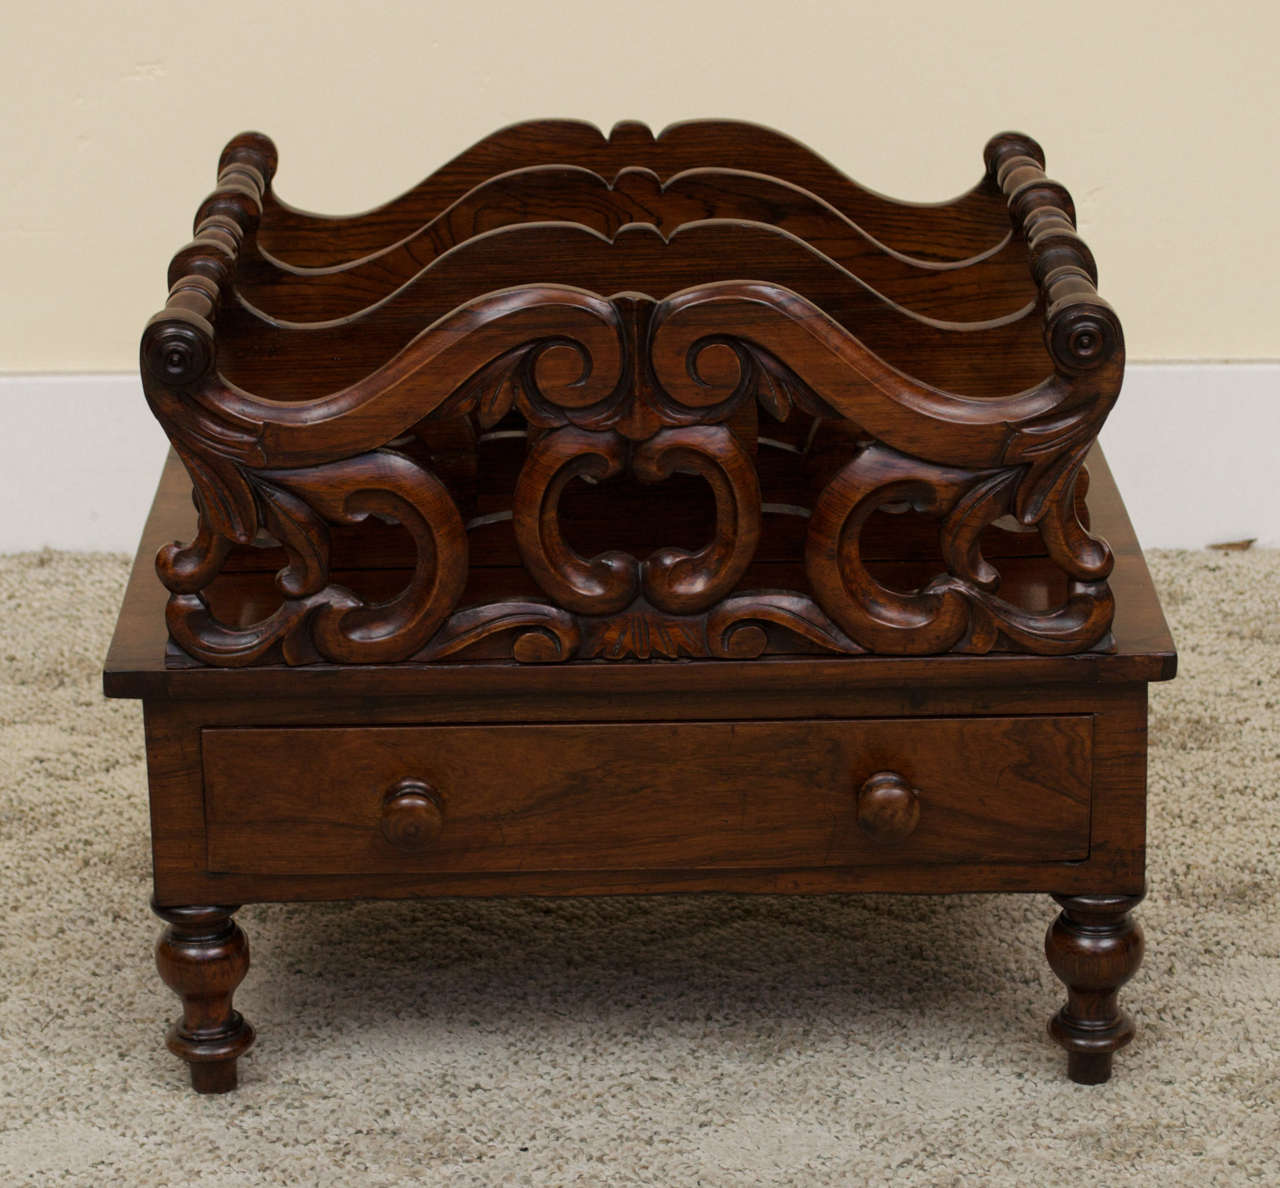 A beautiful carved Victorian mahogany Canterbury fitted with a single drawer. There are four shaped fretwork dividers with the front one having decorative carvings. A Canterbury was originally used to hold sheet music or dishes and now they are used